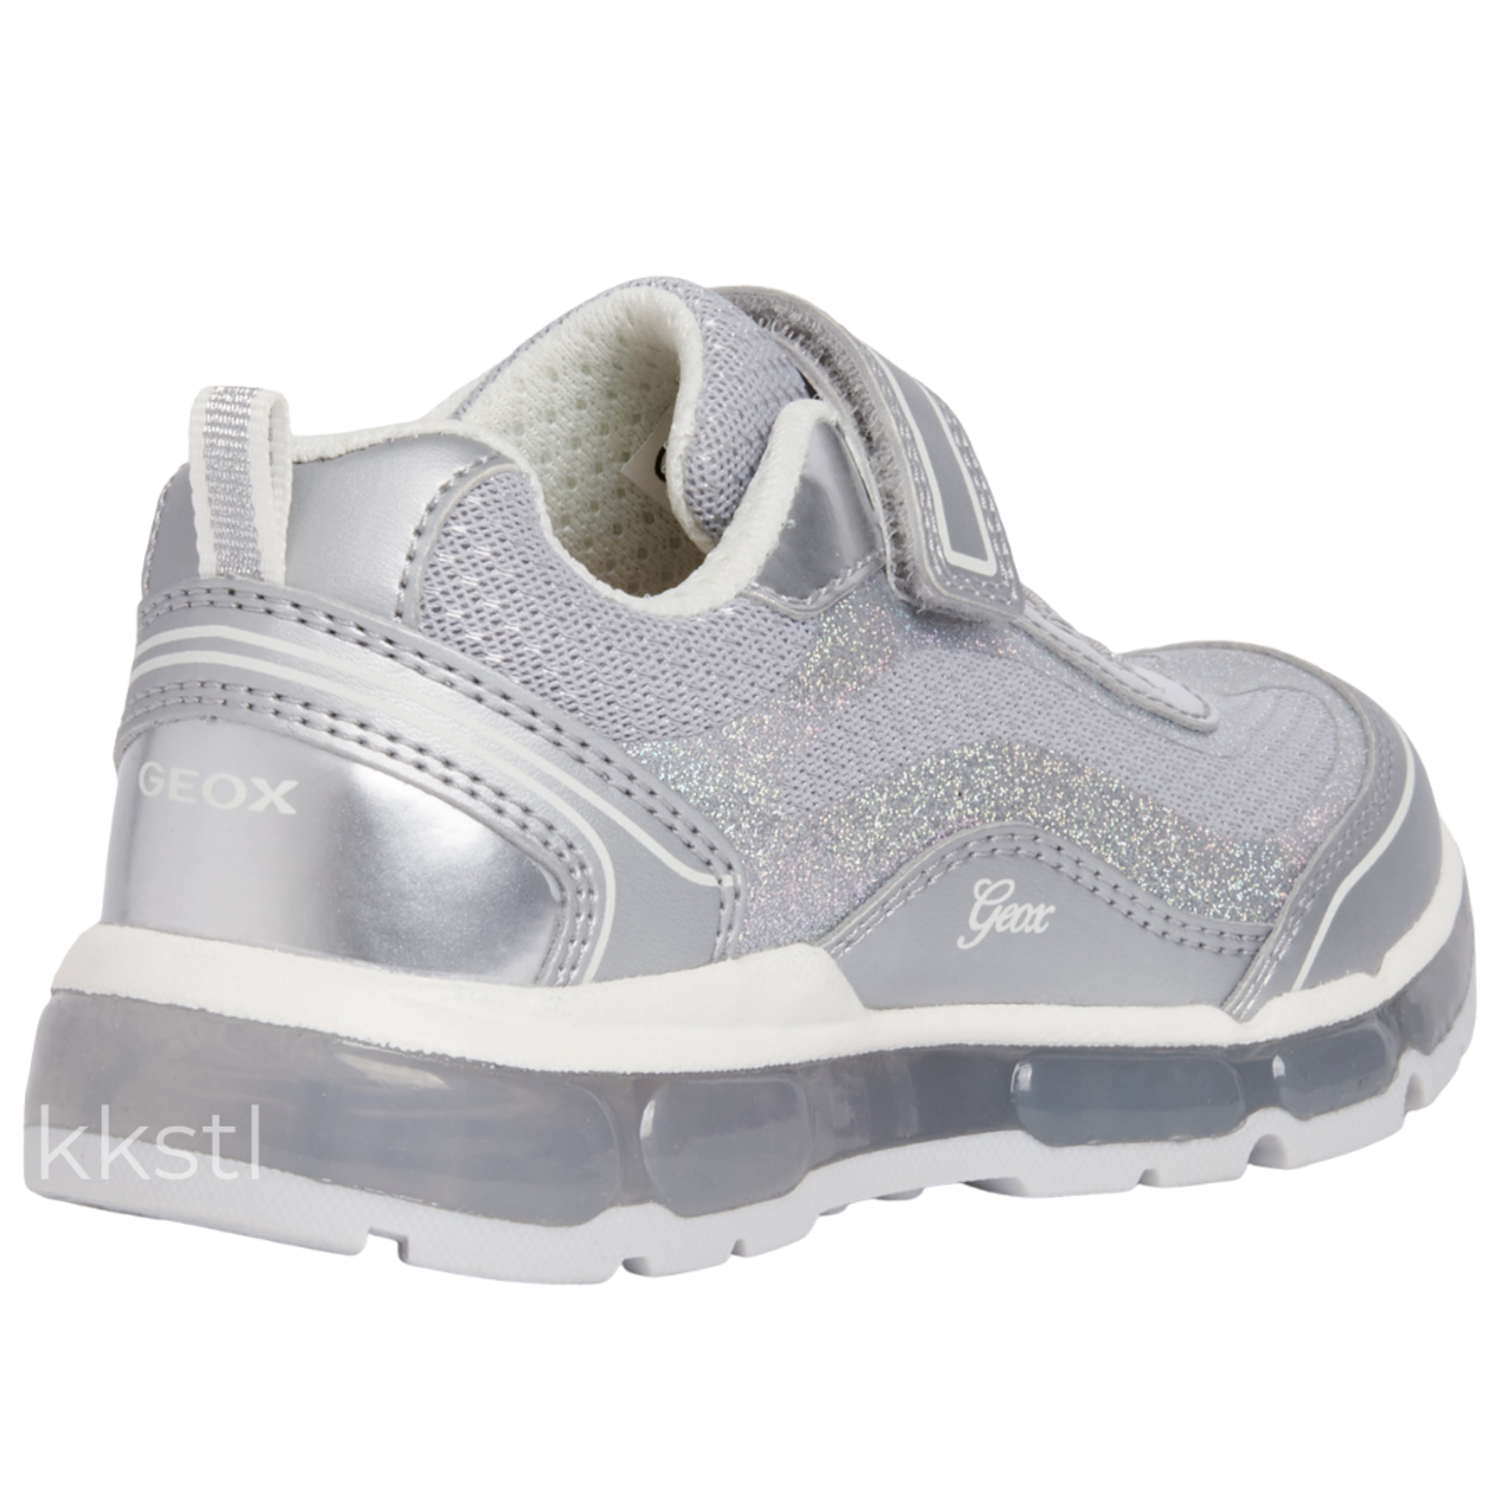 Geox Android Girl Silver - Kids Shoes in Canada - Kiddie Kobbler St Laurent